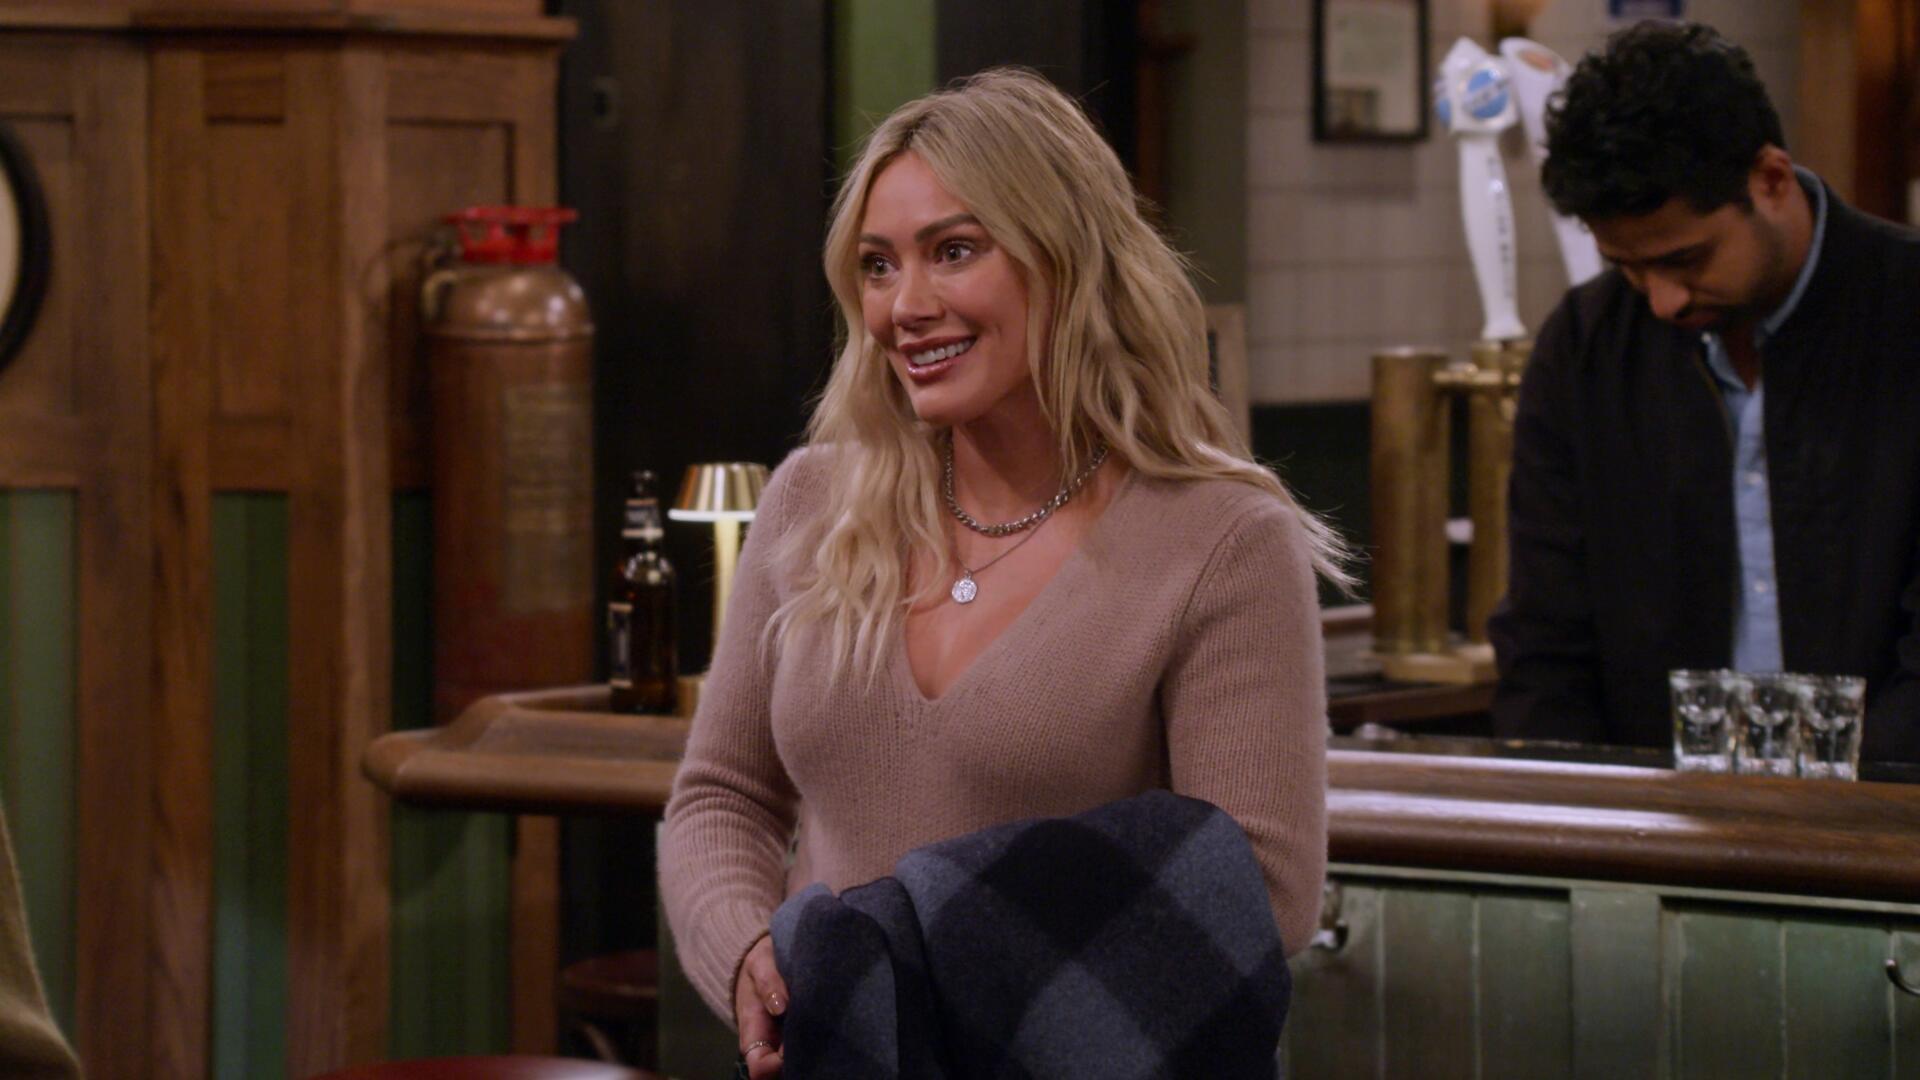 Hilary Duff - How I Met Your Father | Season 2 Episode 8 | Hilary Duff style